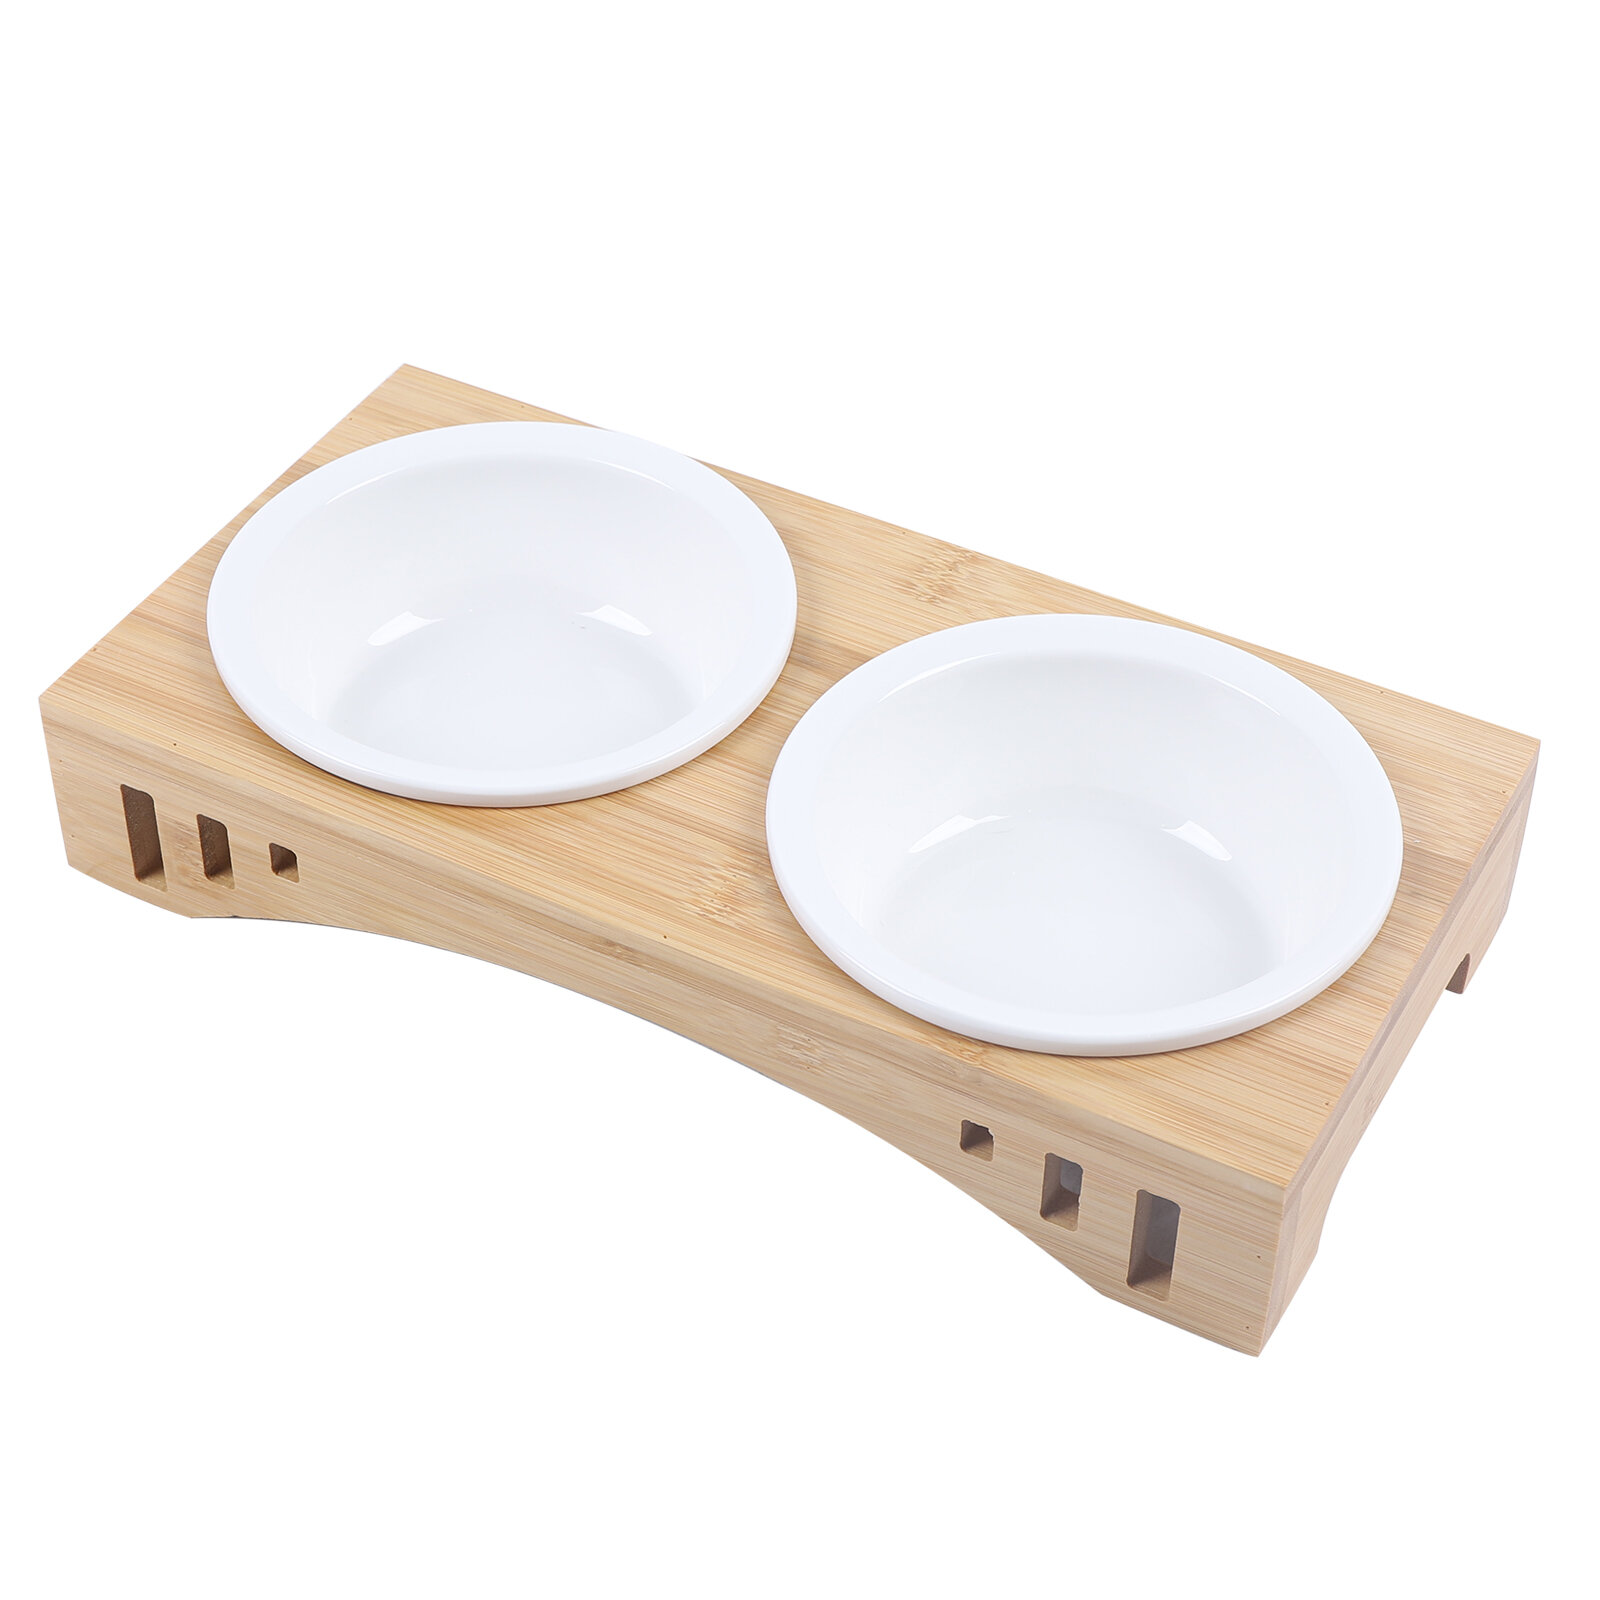 Niubya Dog Bowl with Elevated Stand Include 2 Stainless Steel Bowls Bamboo Framed Raised Bowls for Cats and Small Dogs with Adjustable and Anti-Slip Legs 